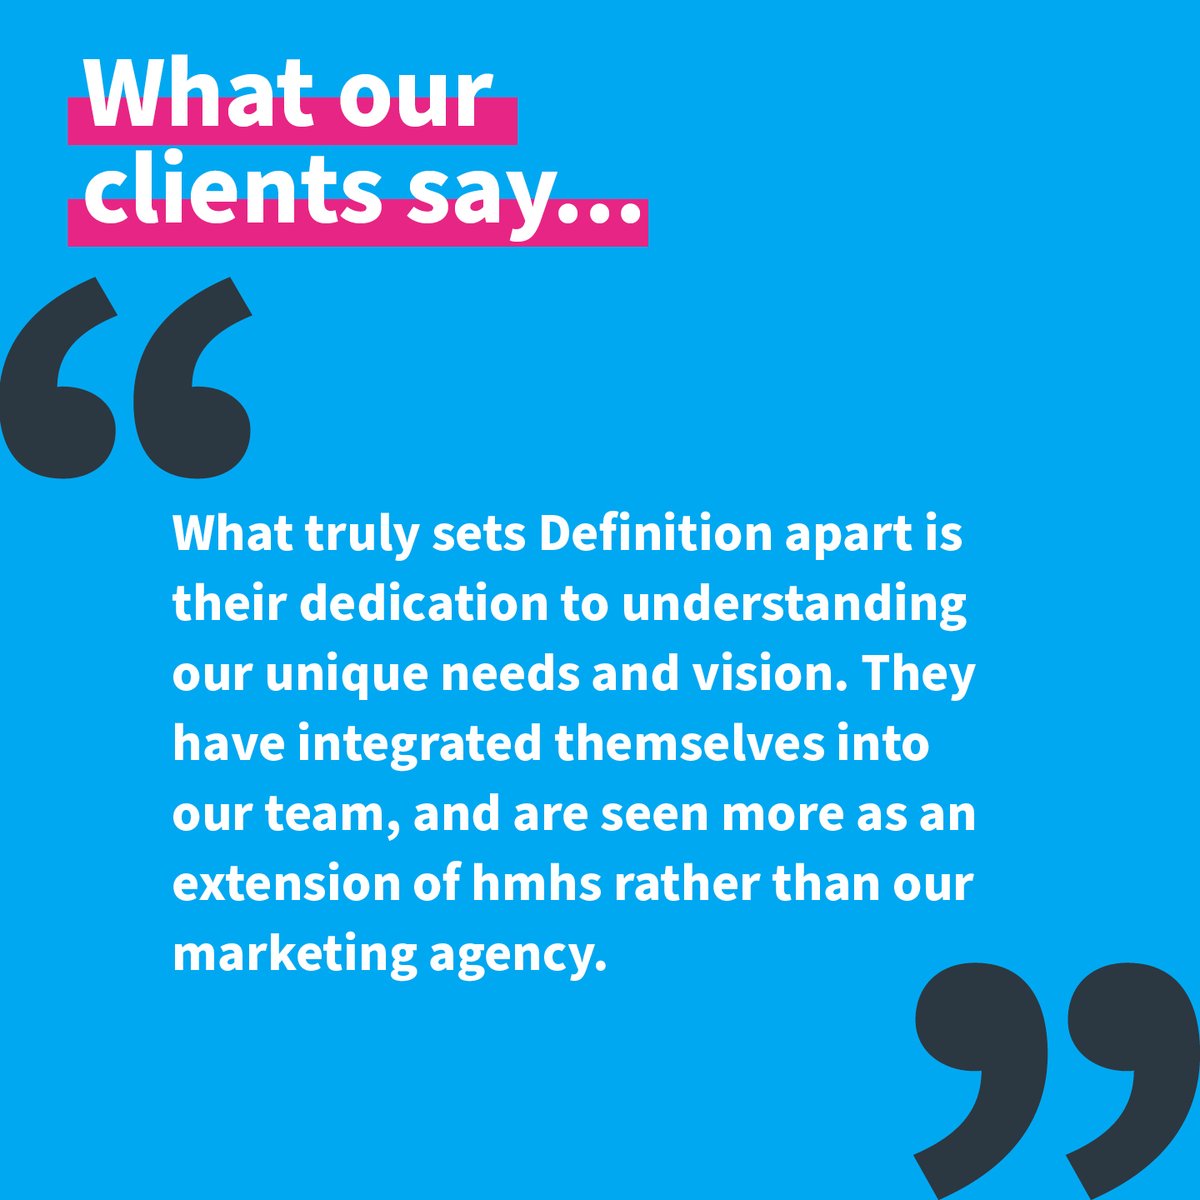 Its great to receive such positive feedback from our clients.

#B2BMarketing #MarketingTeam #MarketingAgency